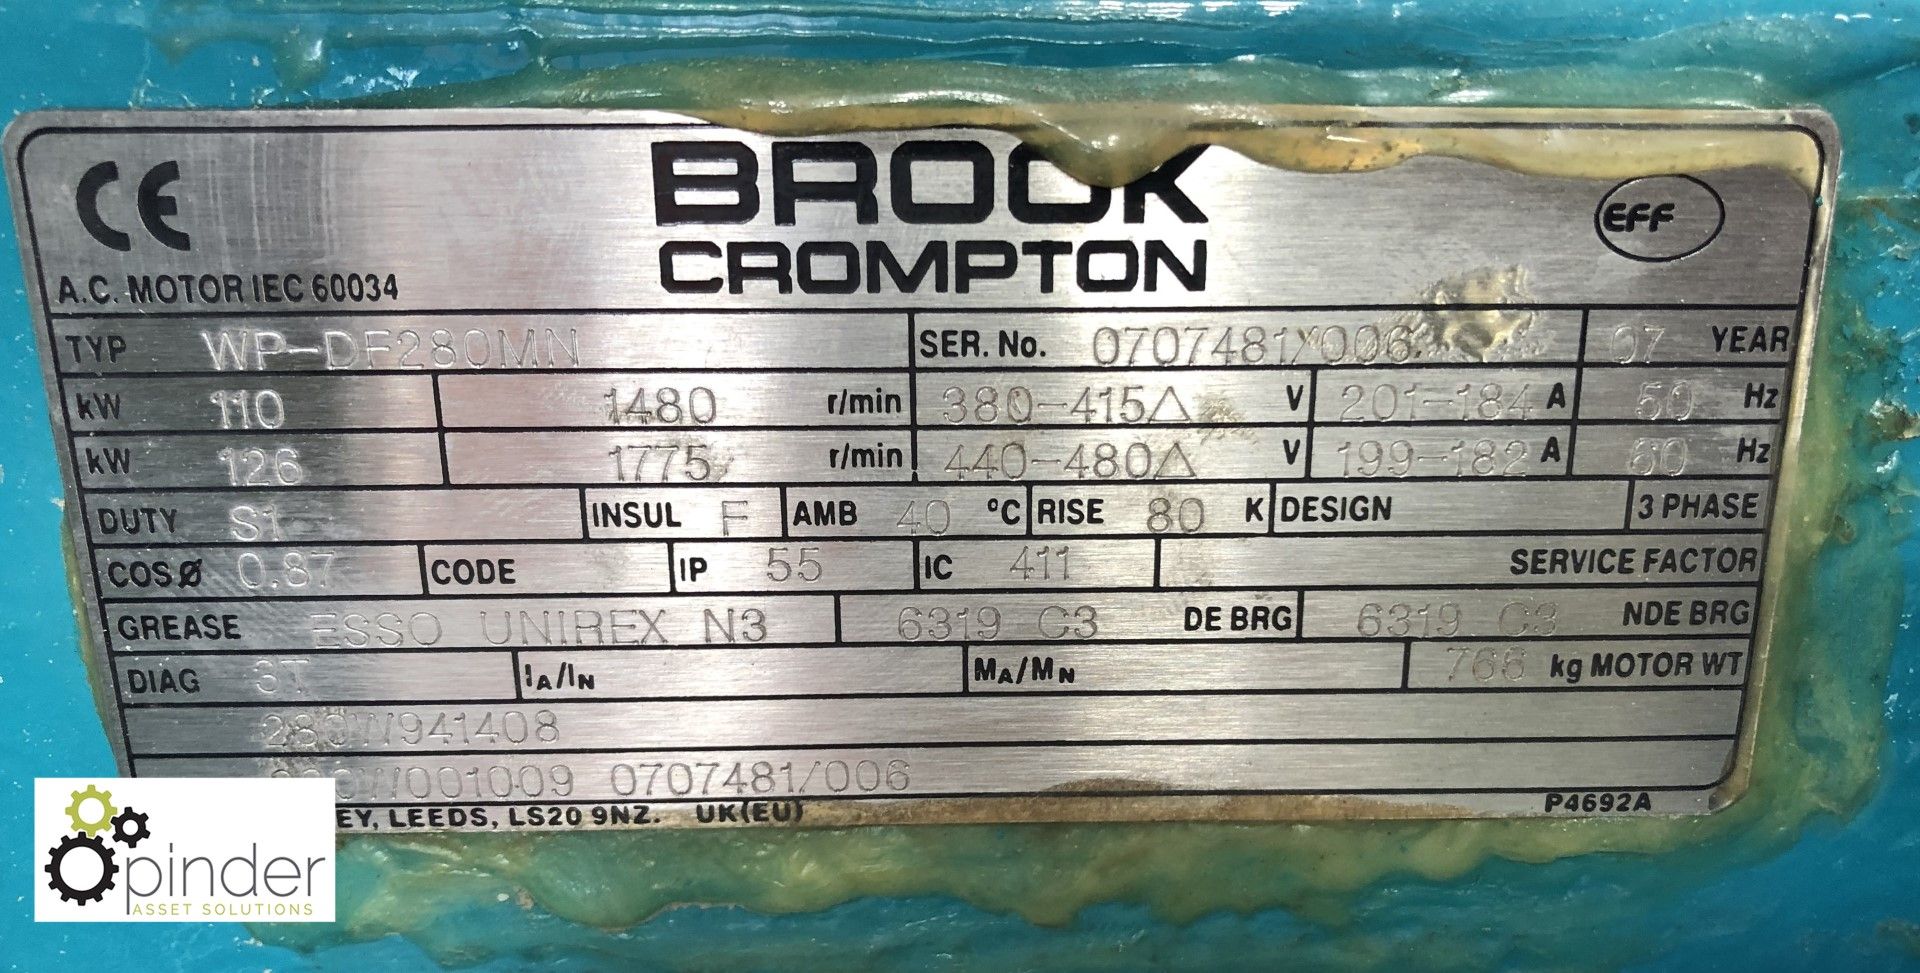 Brook Crompton WP-DF280MM Electric Motor, 110kw, unused (please note there is a £5 plus VAT lift out - Image 2 of 2